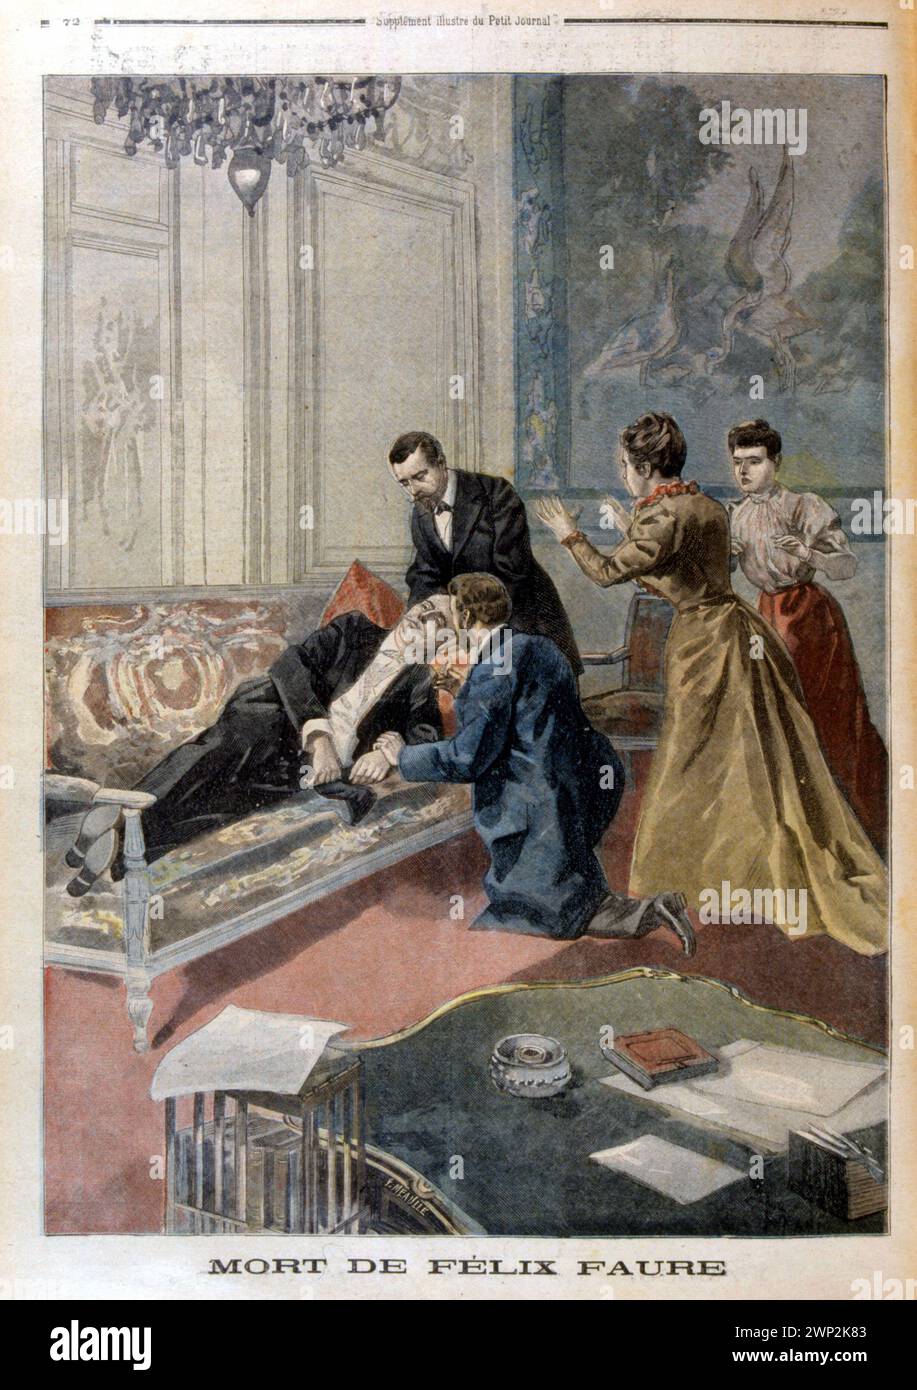 Death of Felix Faure in the salons of the Elysee Palace - in 'Le Petit Journal', 26 02 1899 Stock Photo